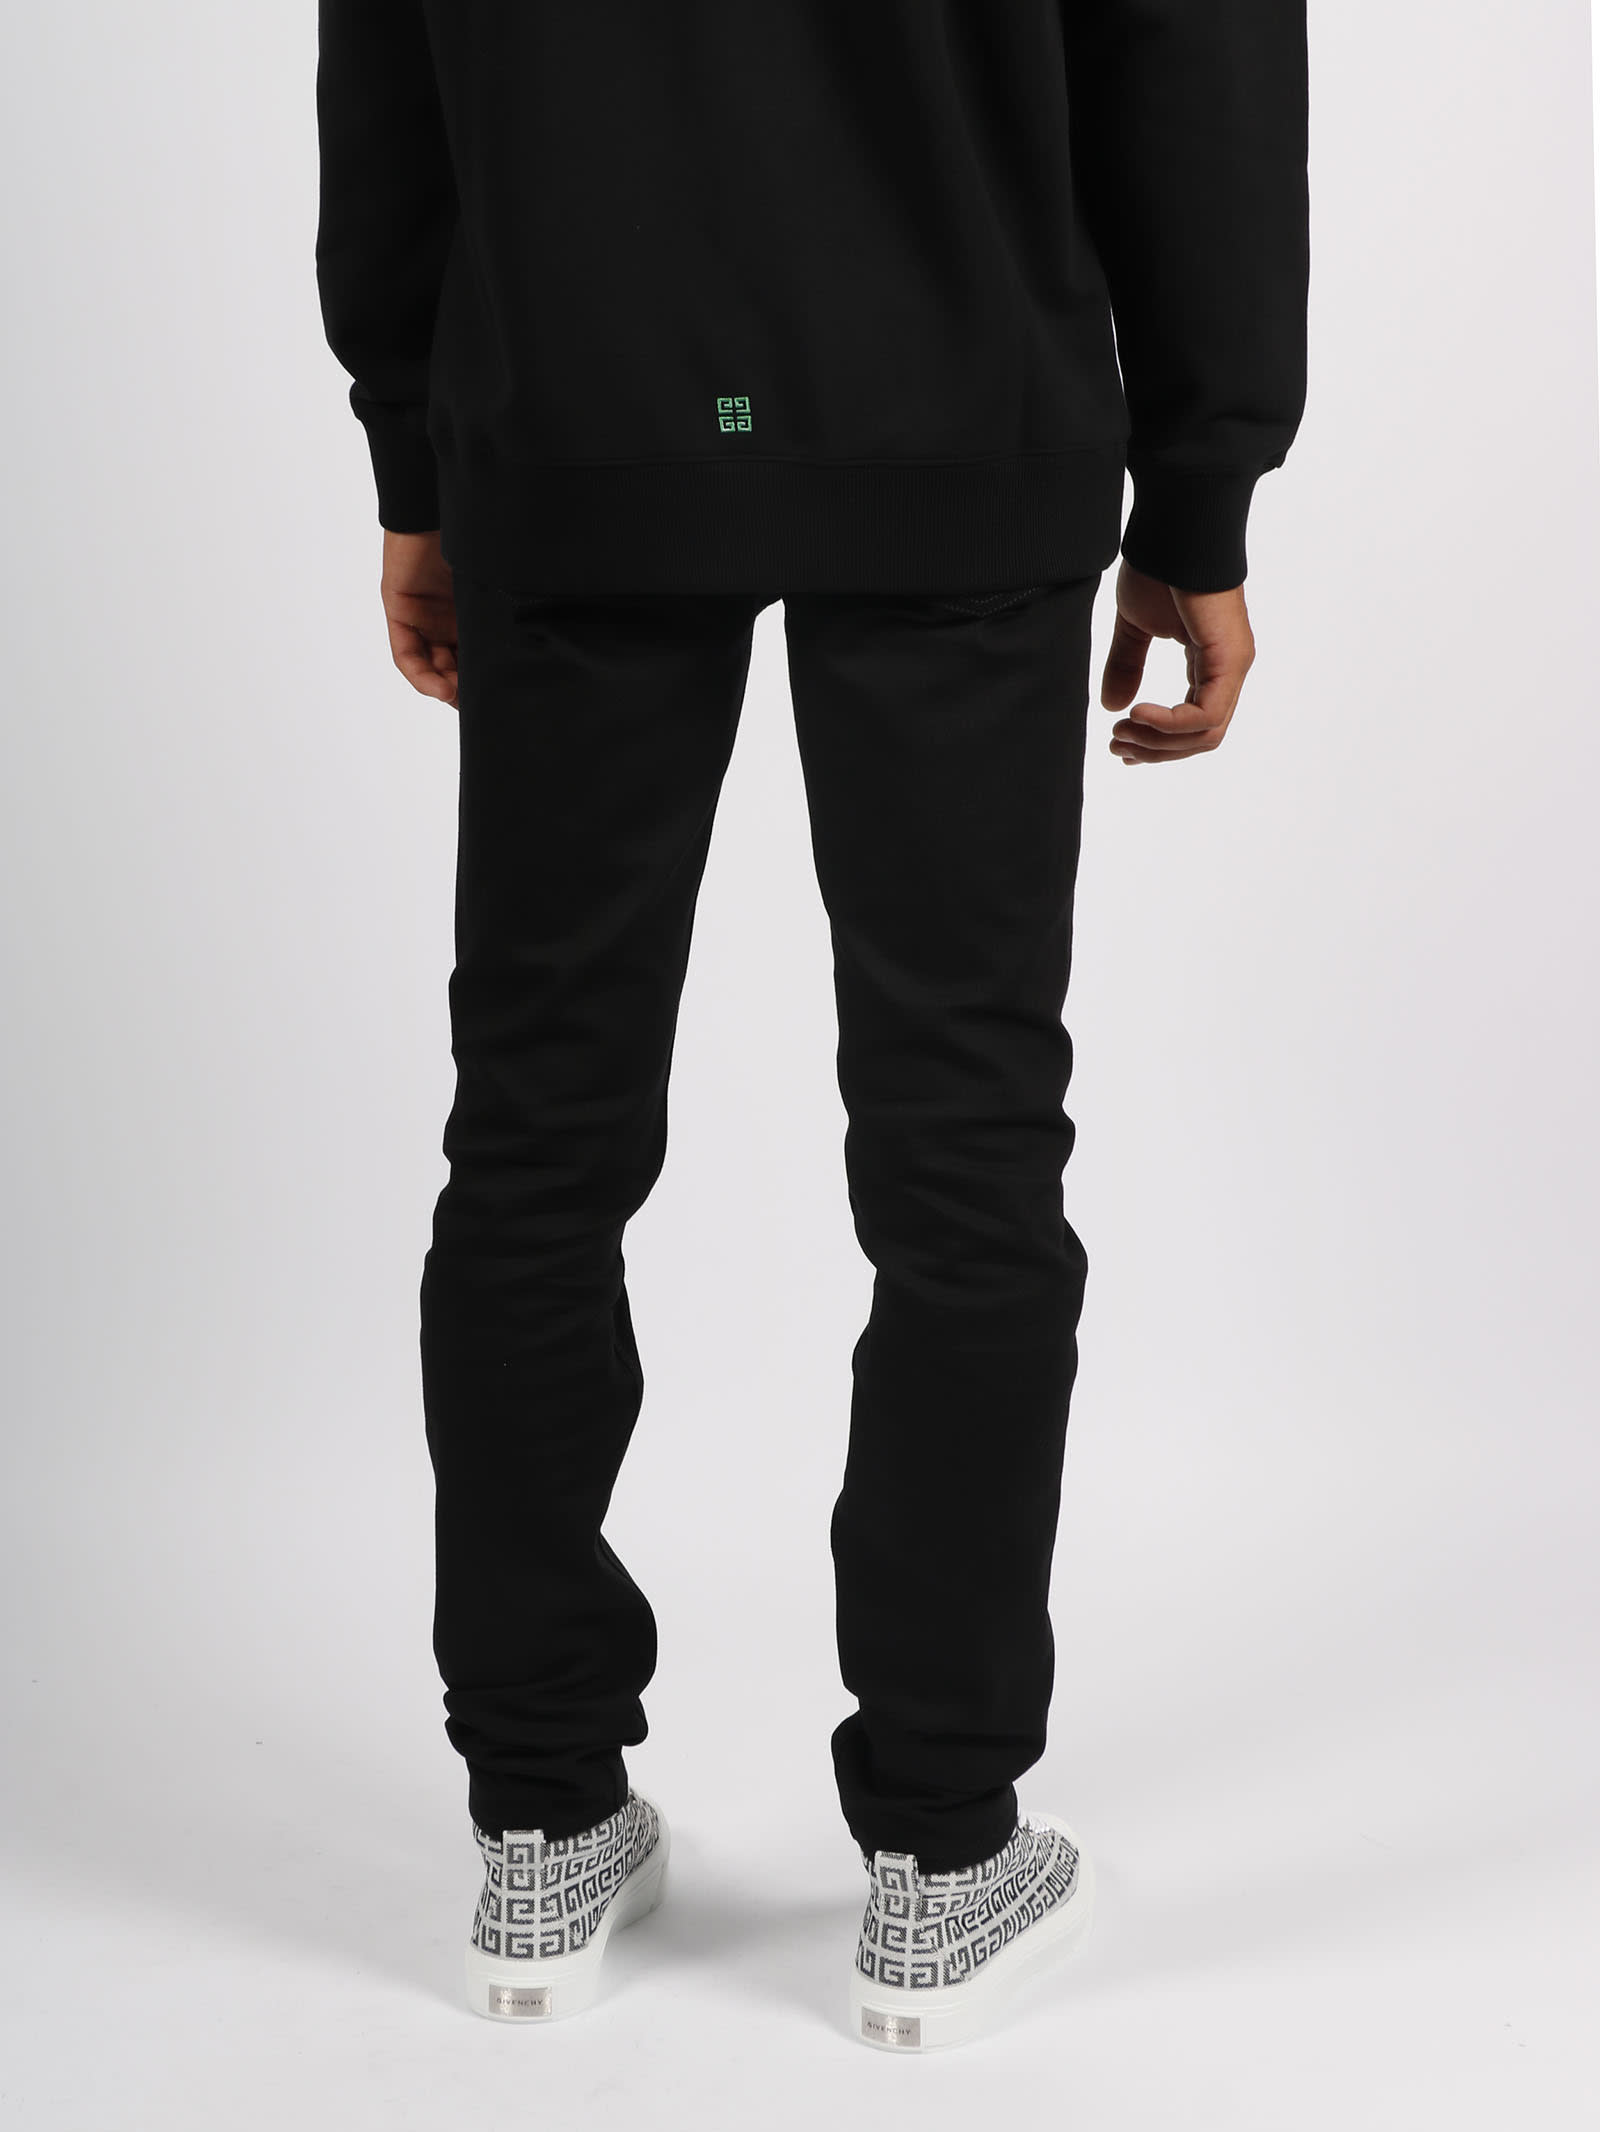 Shop Givenchy Fleece Trousers In Black